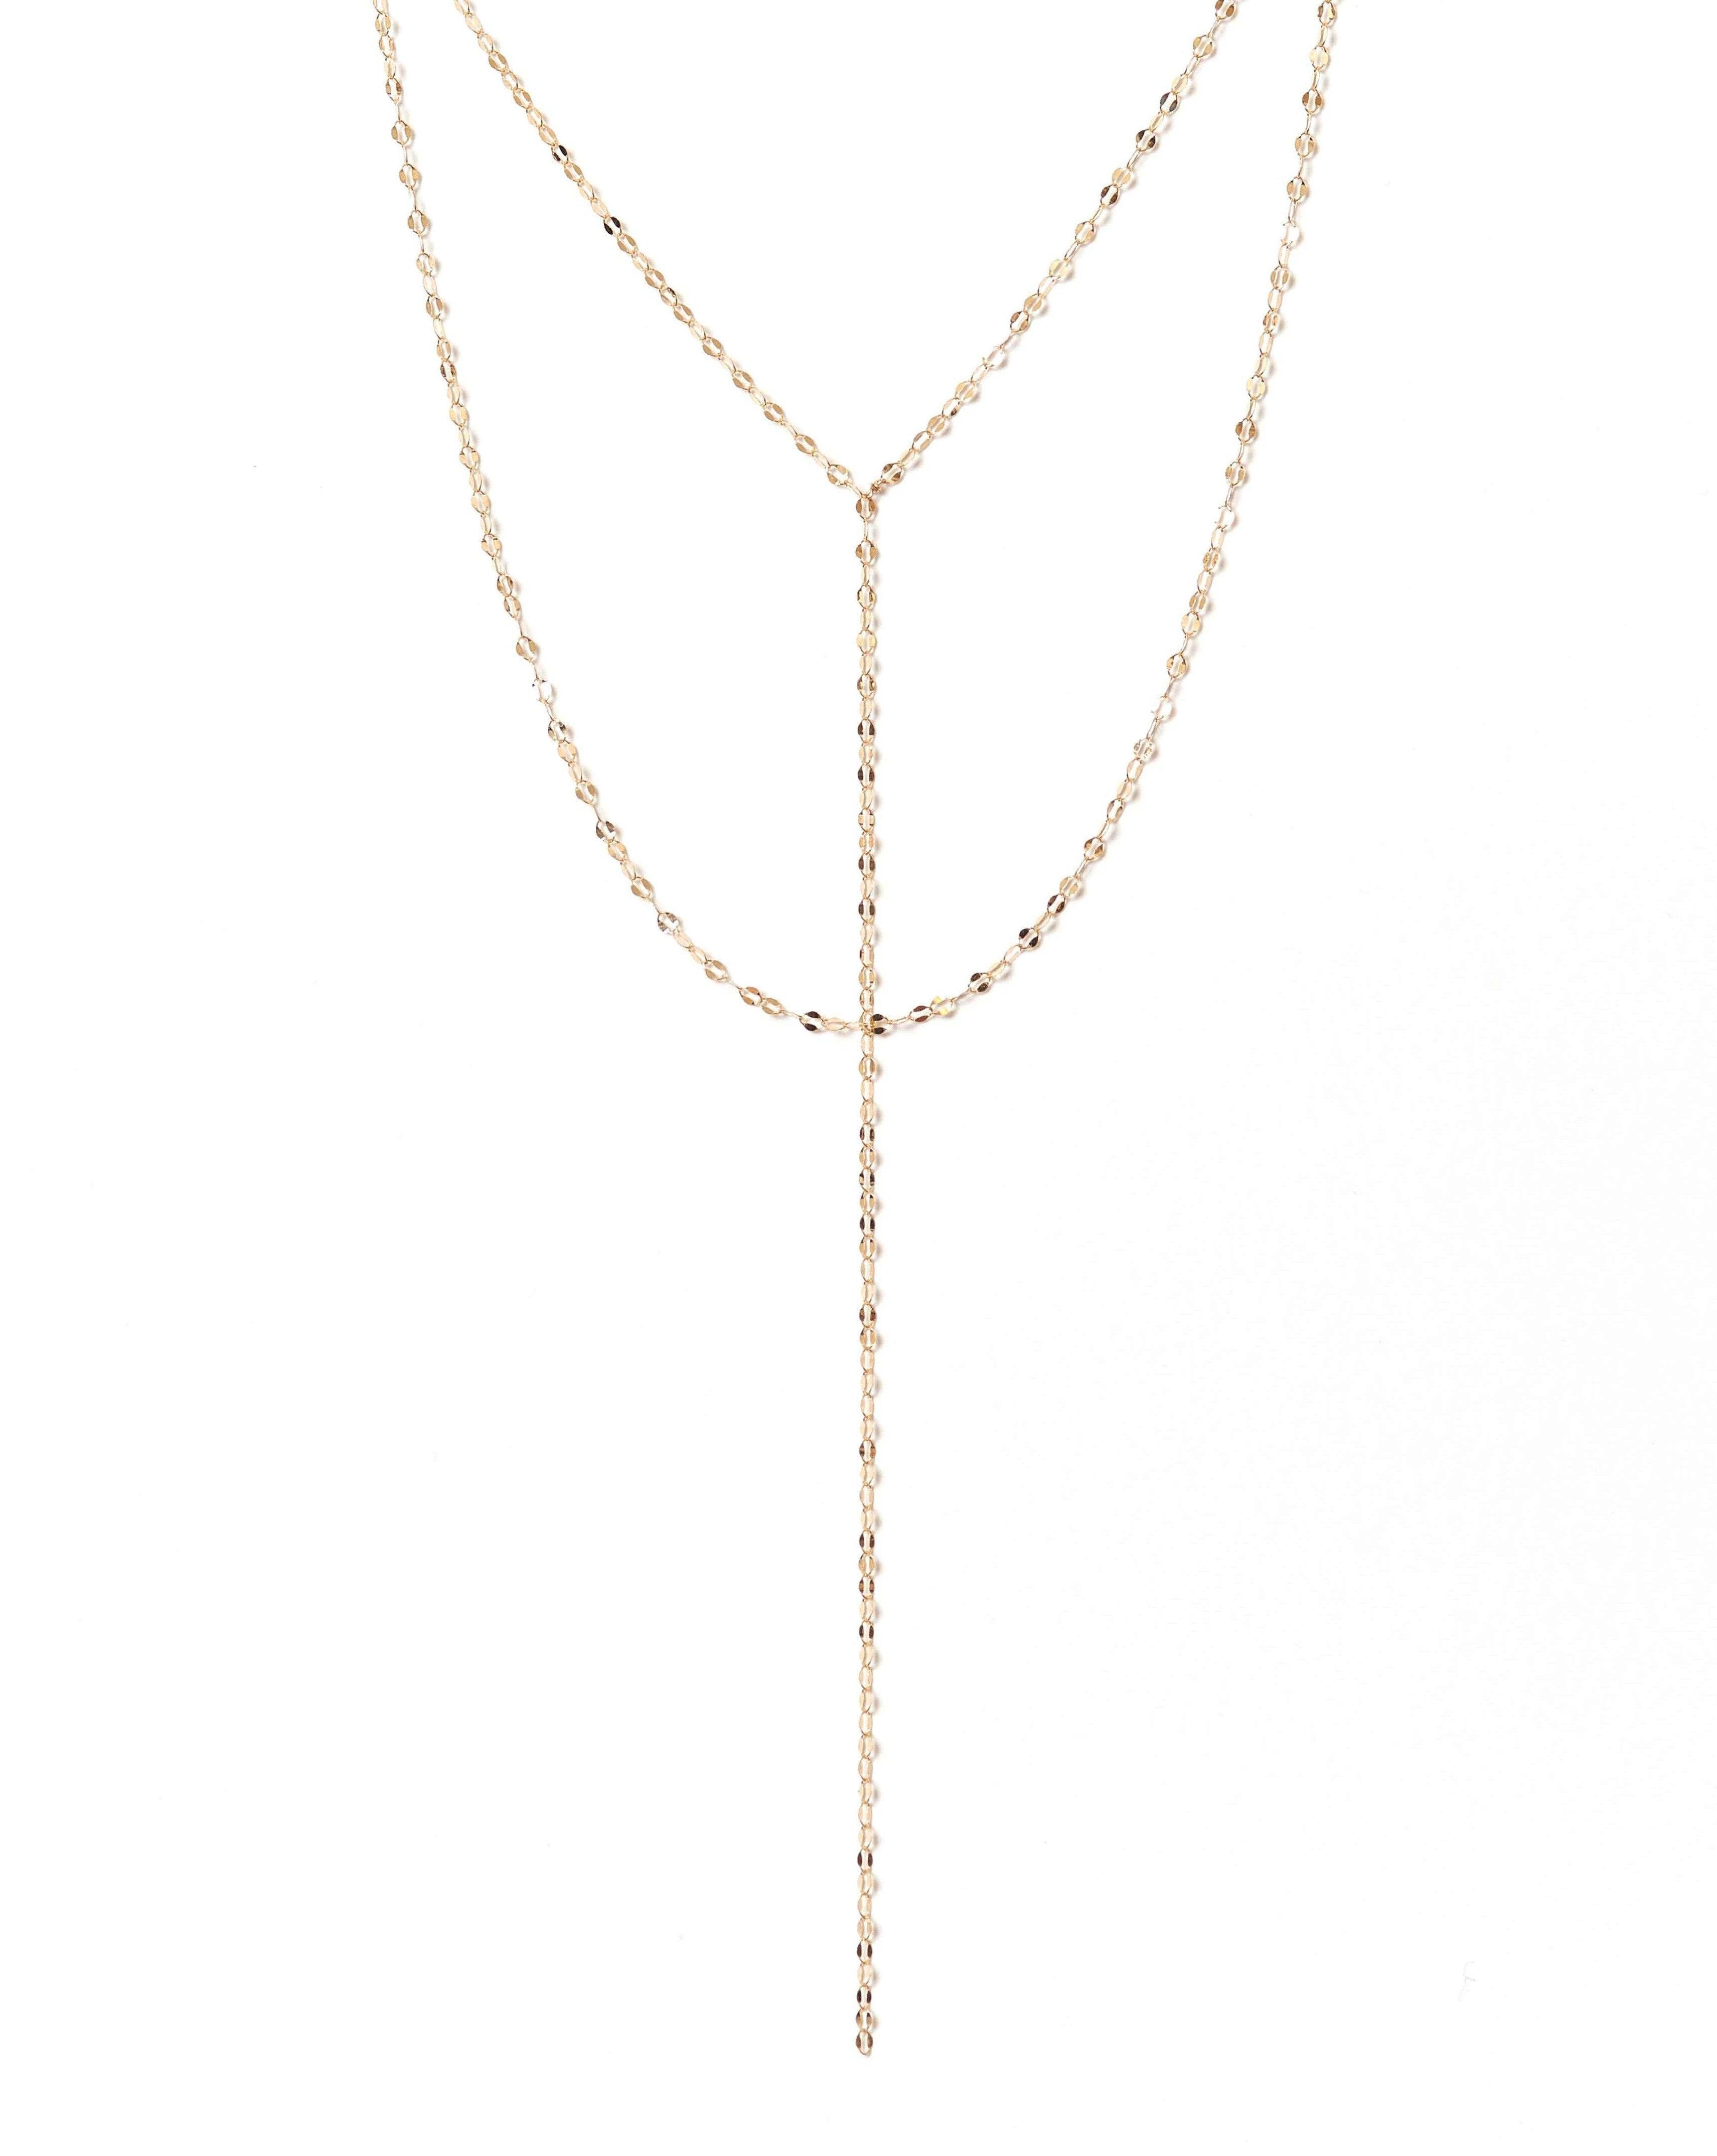 Jolila Necklace by KOZAKH. A 16 to 18 inch adjustable length double necklace, with long lariat style drop, crafted in 14K Gold Filled.